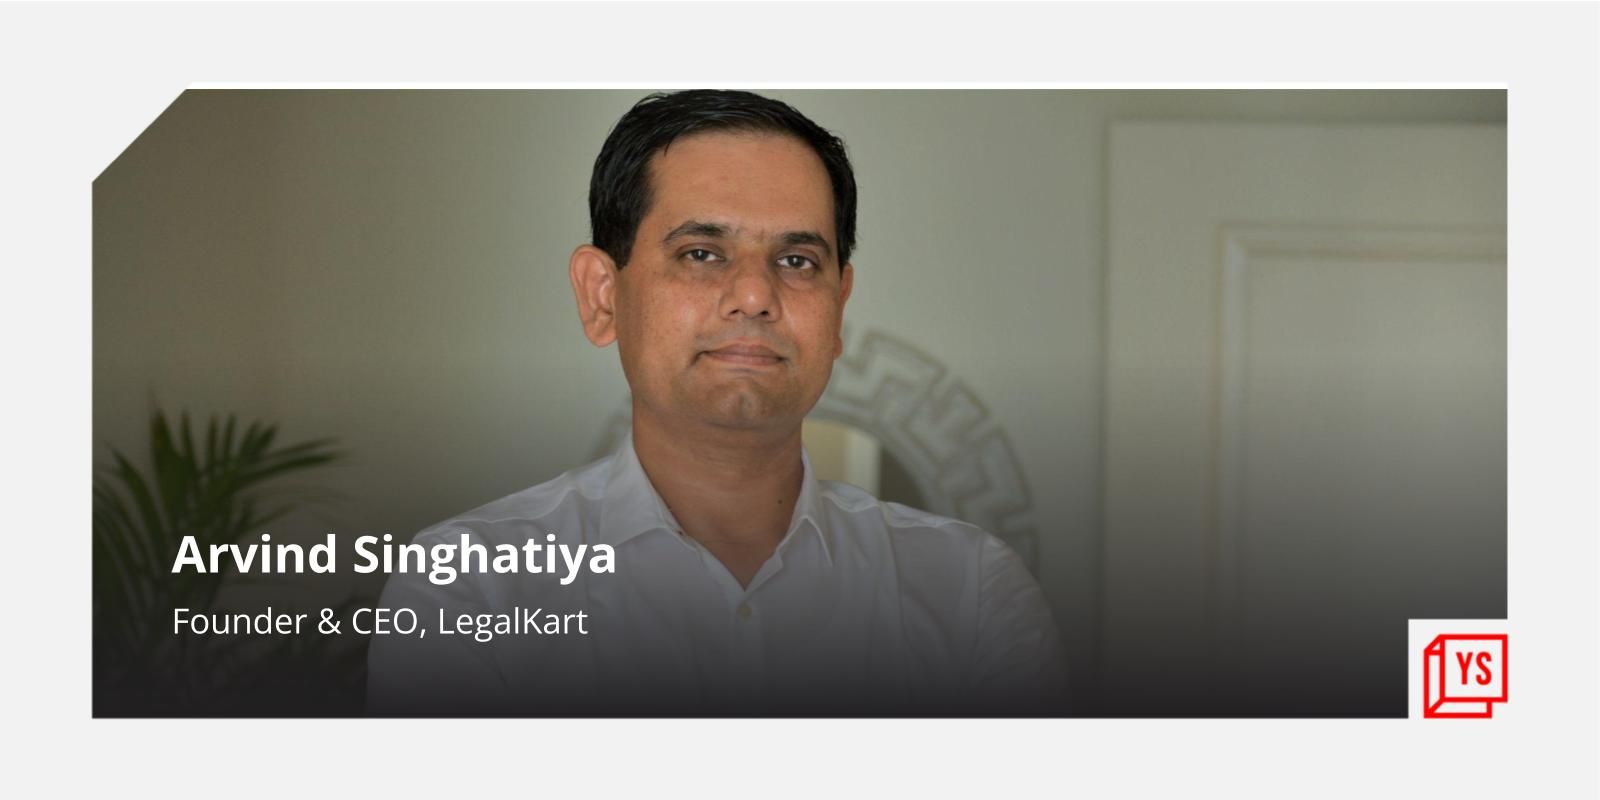 Gurugram-based LegalKart aims to become the Amazon of legal services